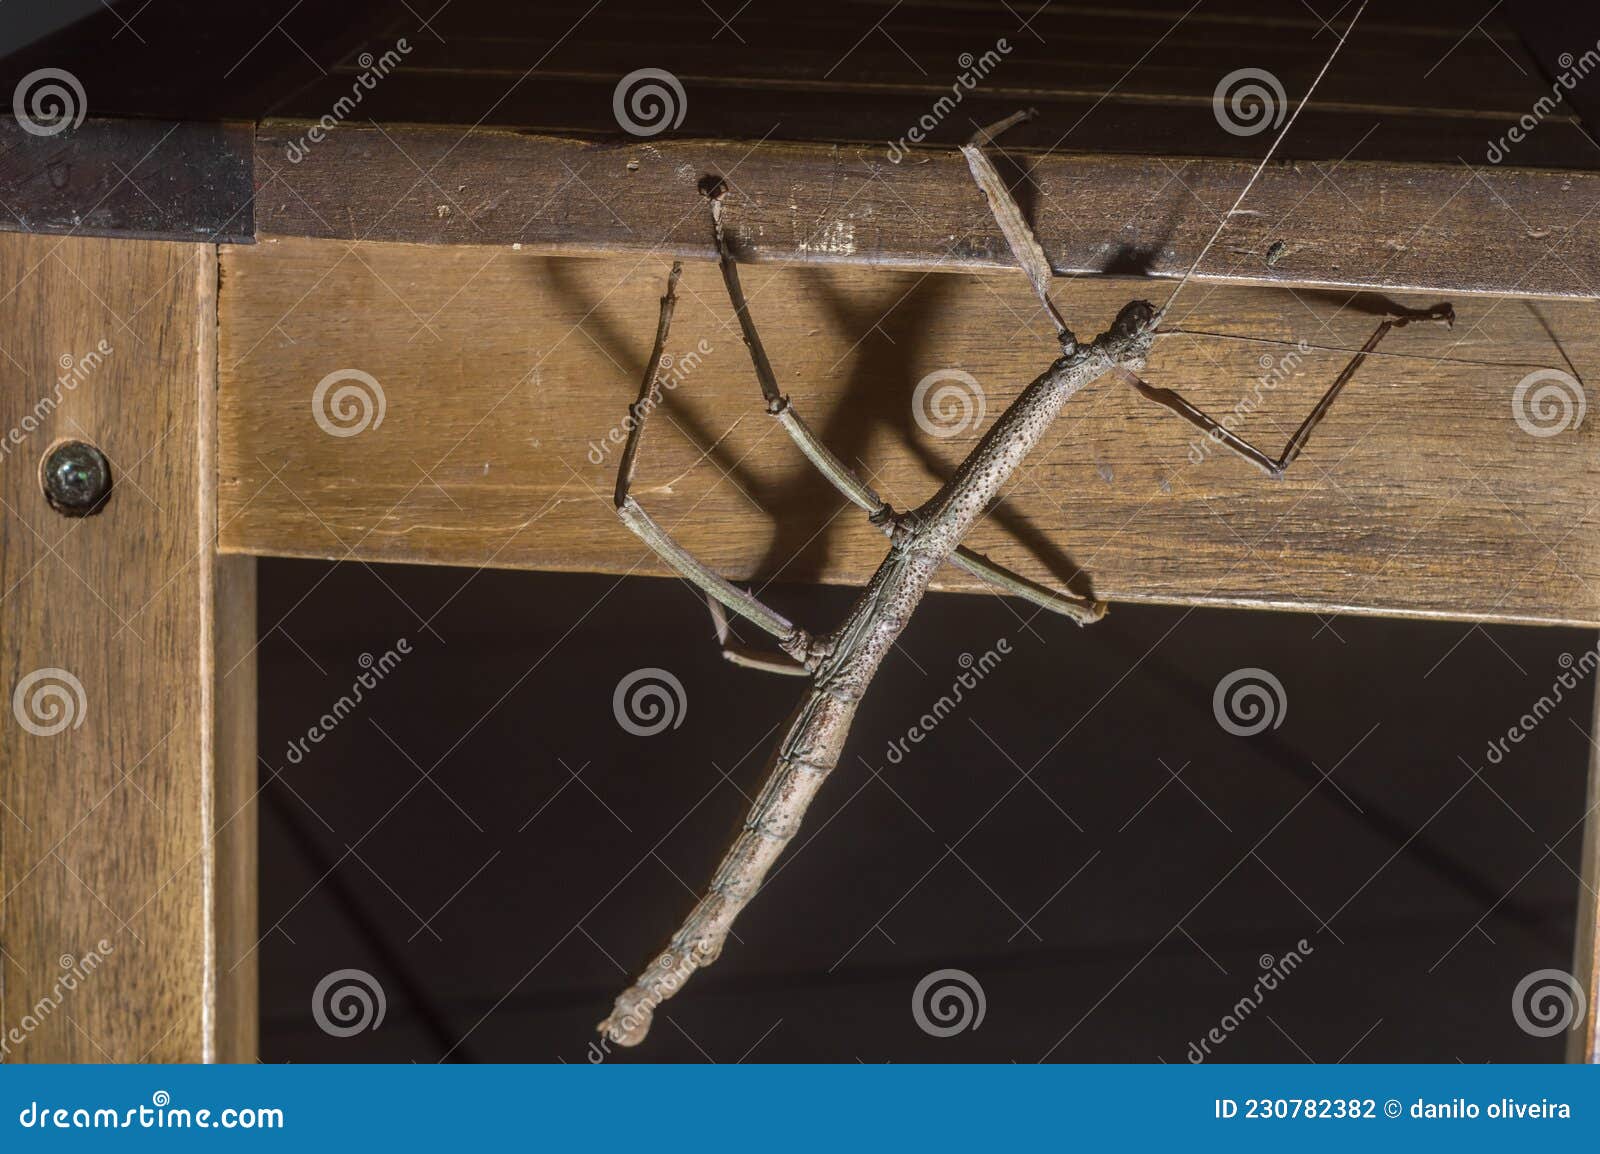 female insec stick on a wooden bench with copy space, phasmatidae